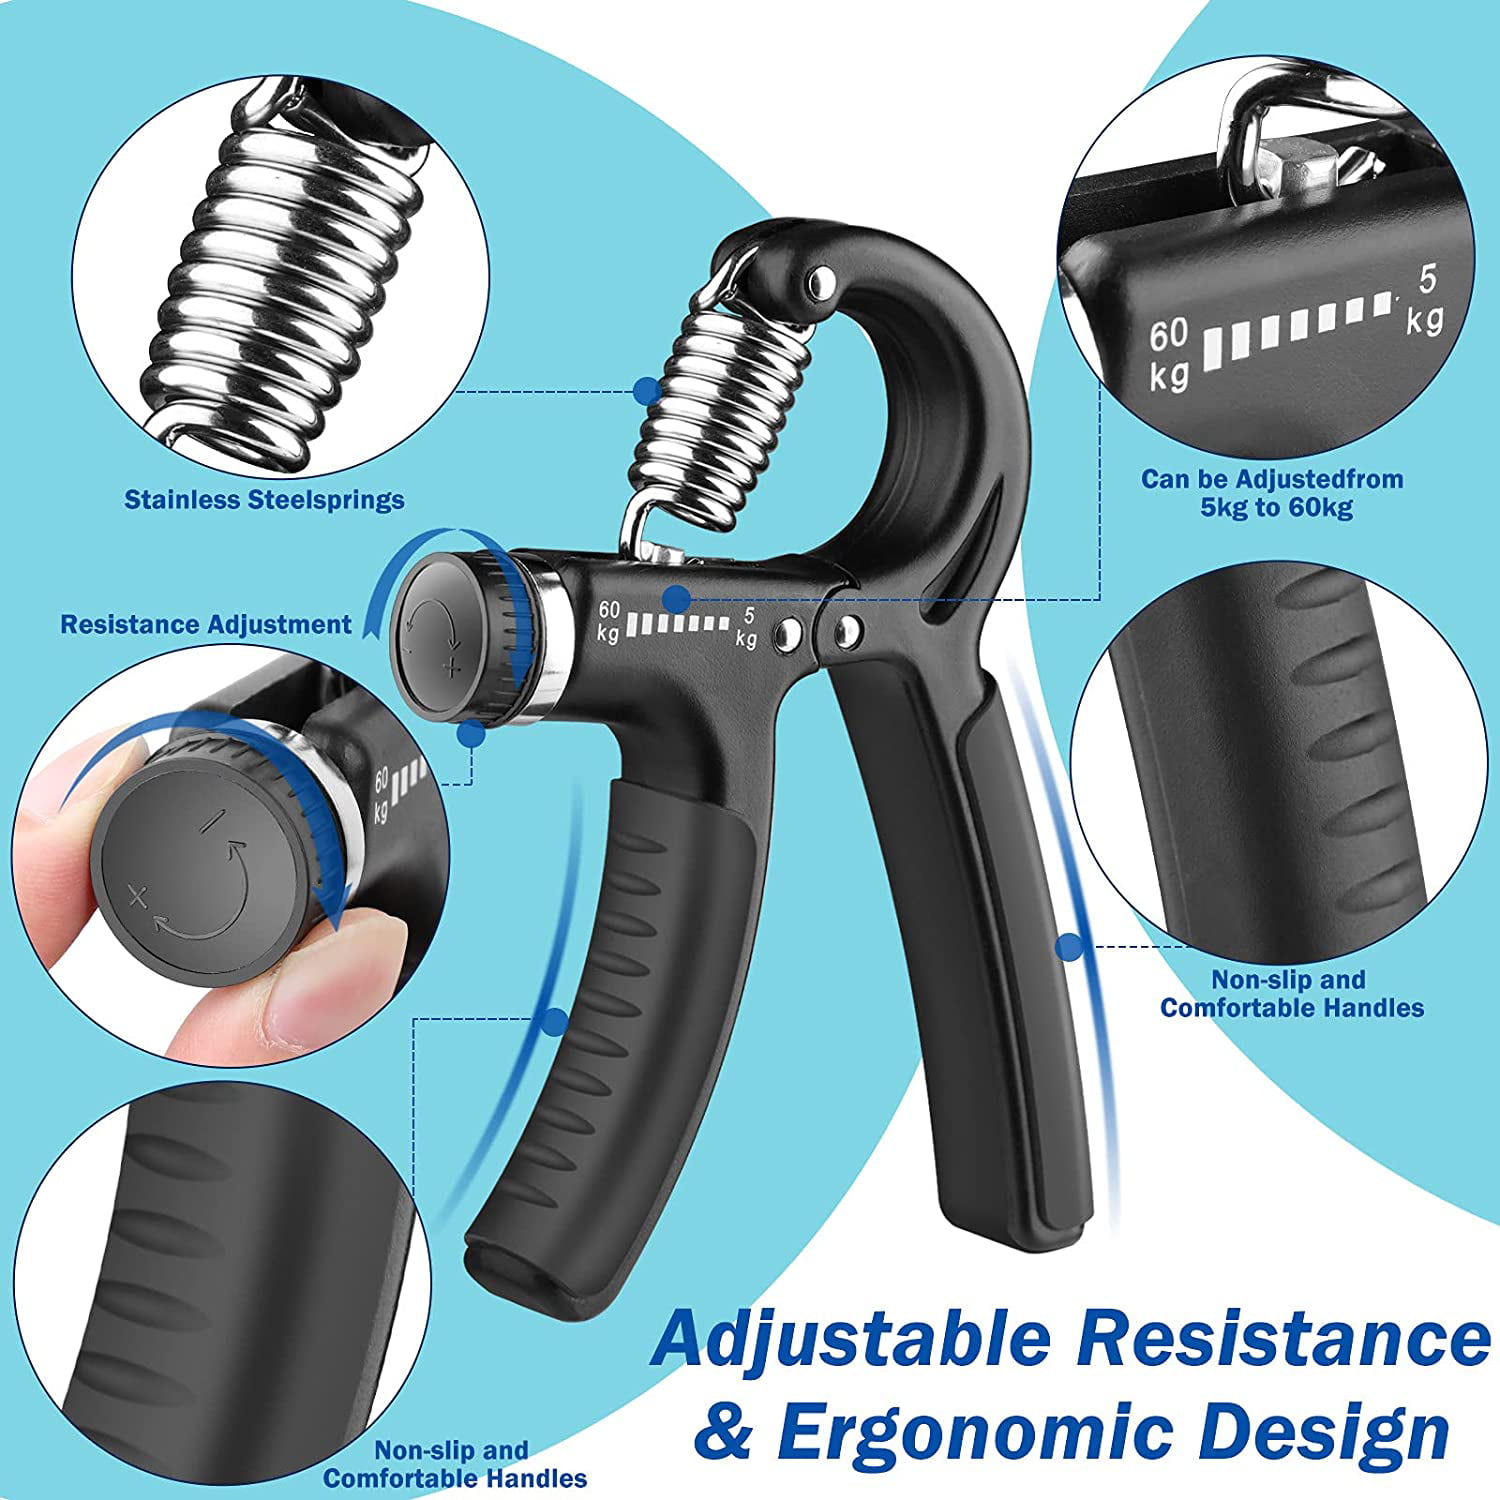 Adjustable Resistance 11-132 Lbs Grip Strength Trainer for Muscle Building and Injury Recovery for Athletes Hand Grip Strengthener Forearm Exerciser 